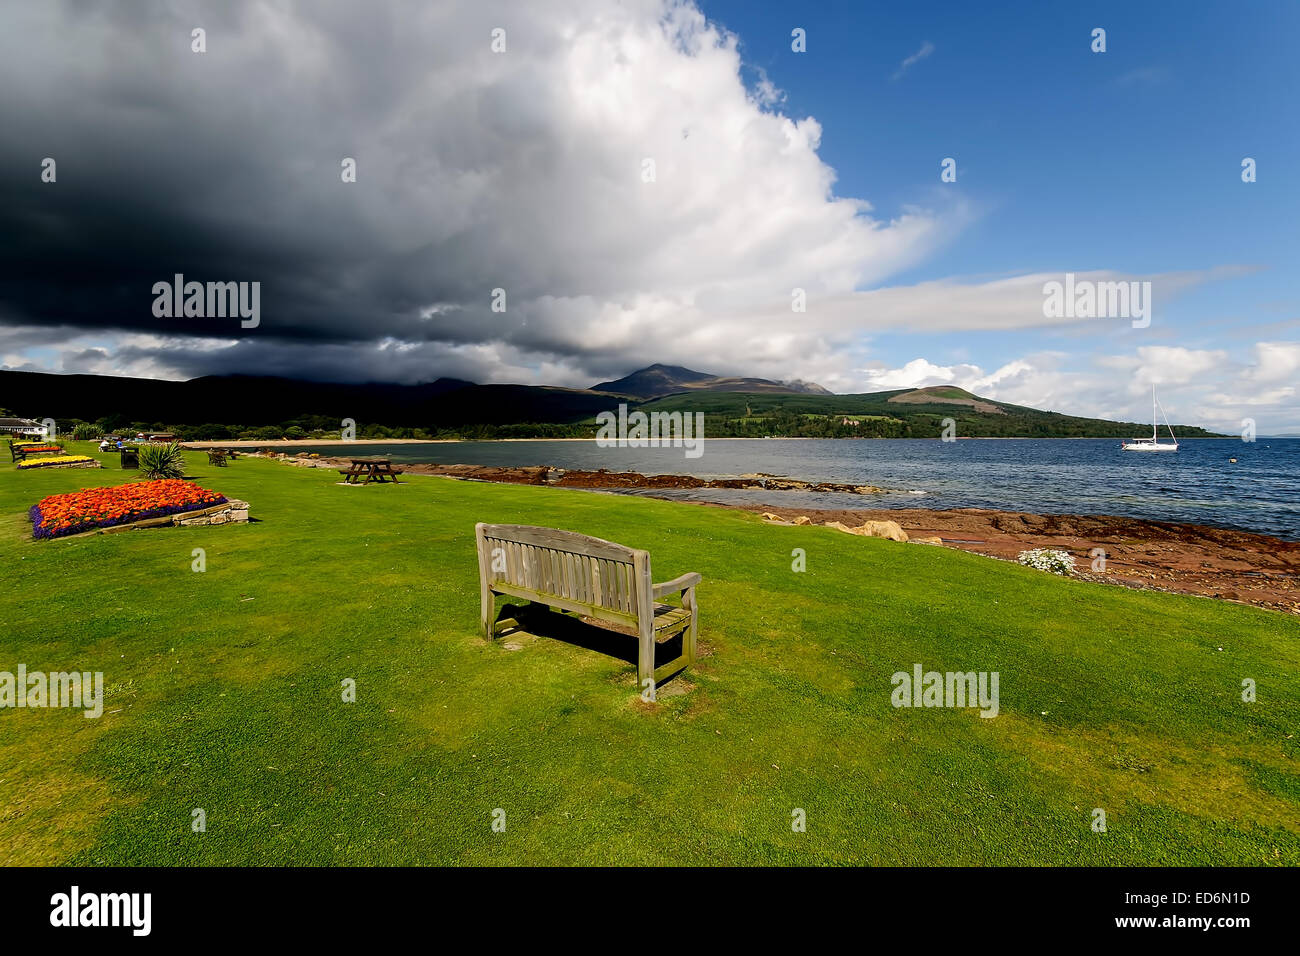 The views to Goat Fell on the Isle of Arran, Scotland from Brodick Stock Photo